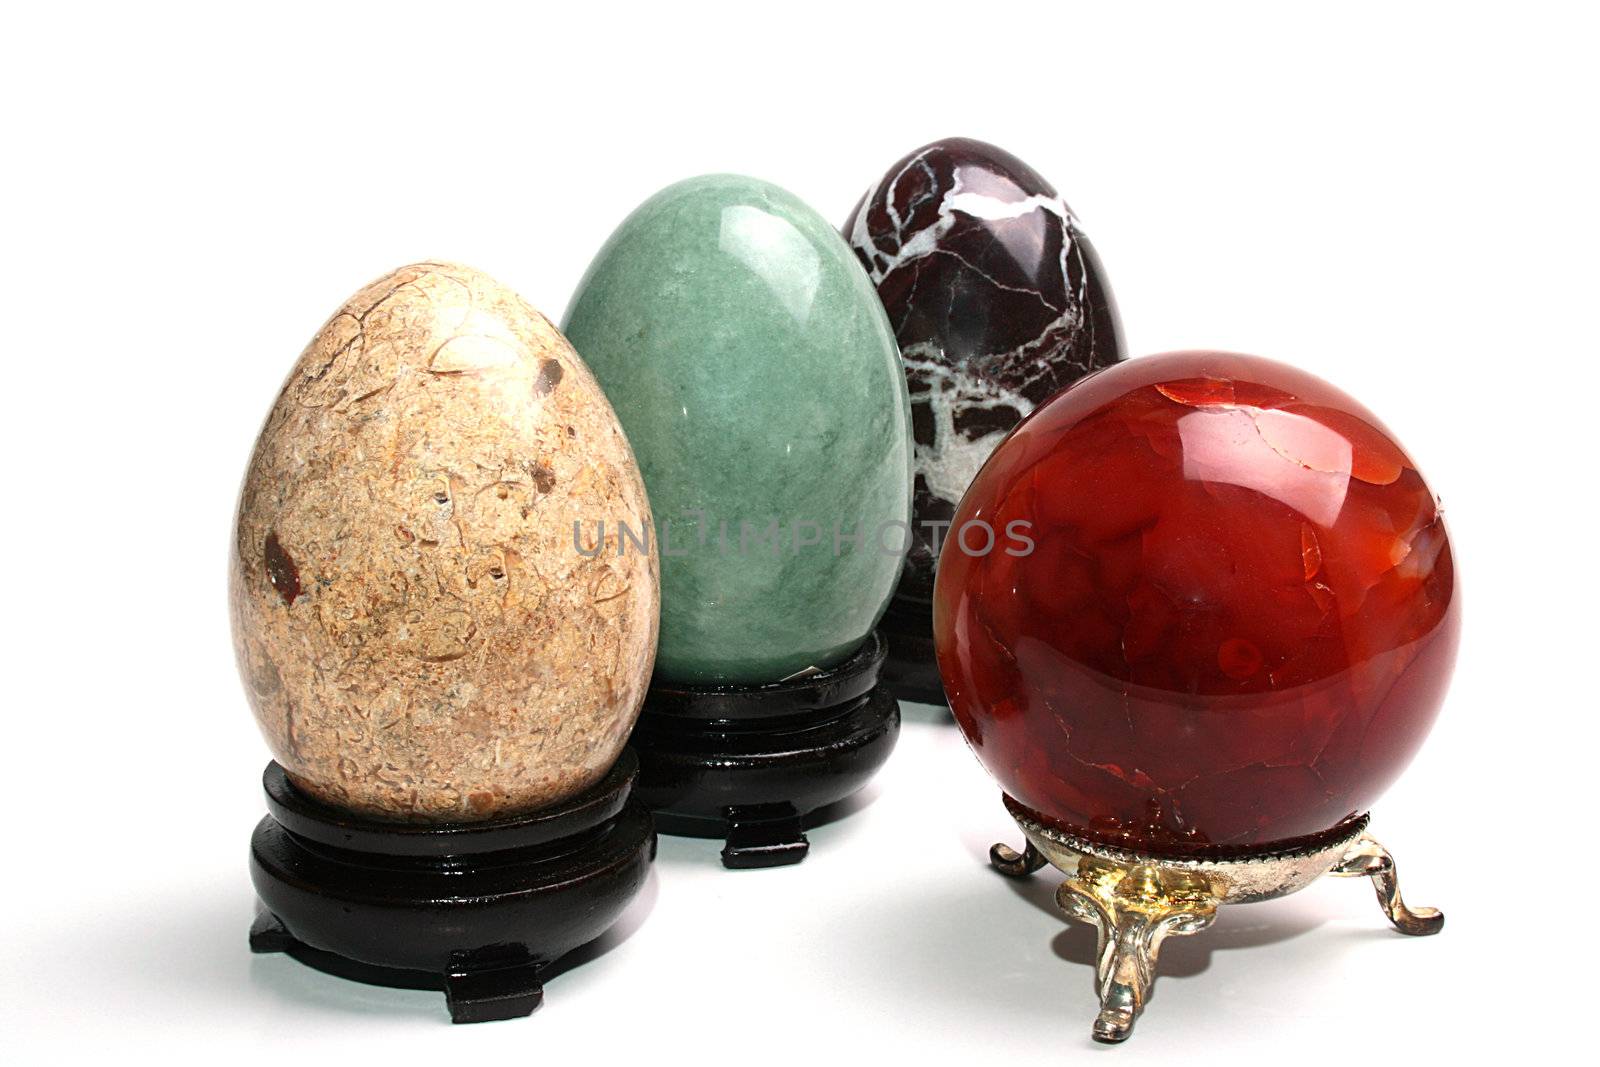 Multi-coloured stones which are used in spiritualistic and magic sessions in the form of a sphere and eggs on supports.